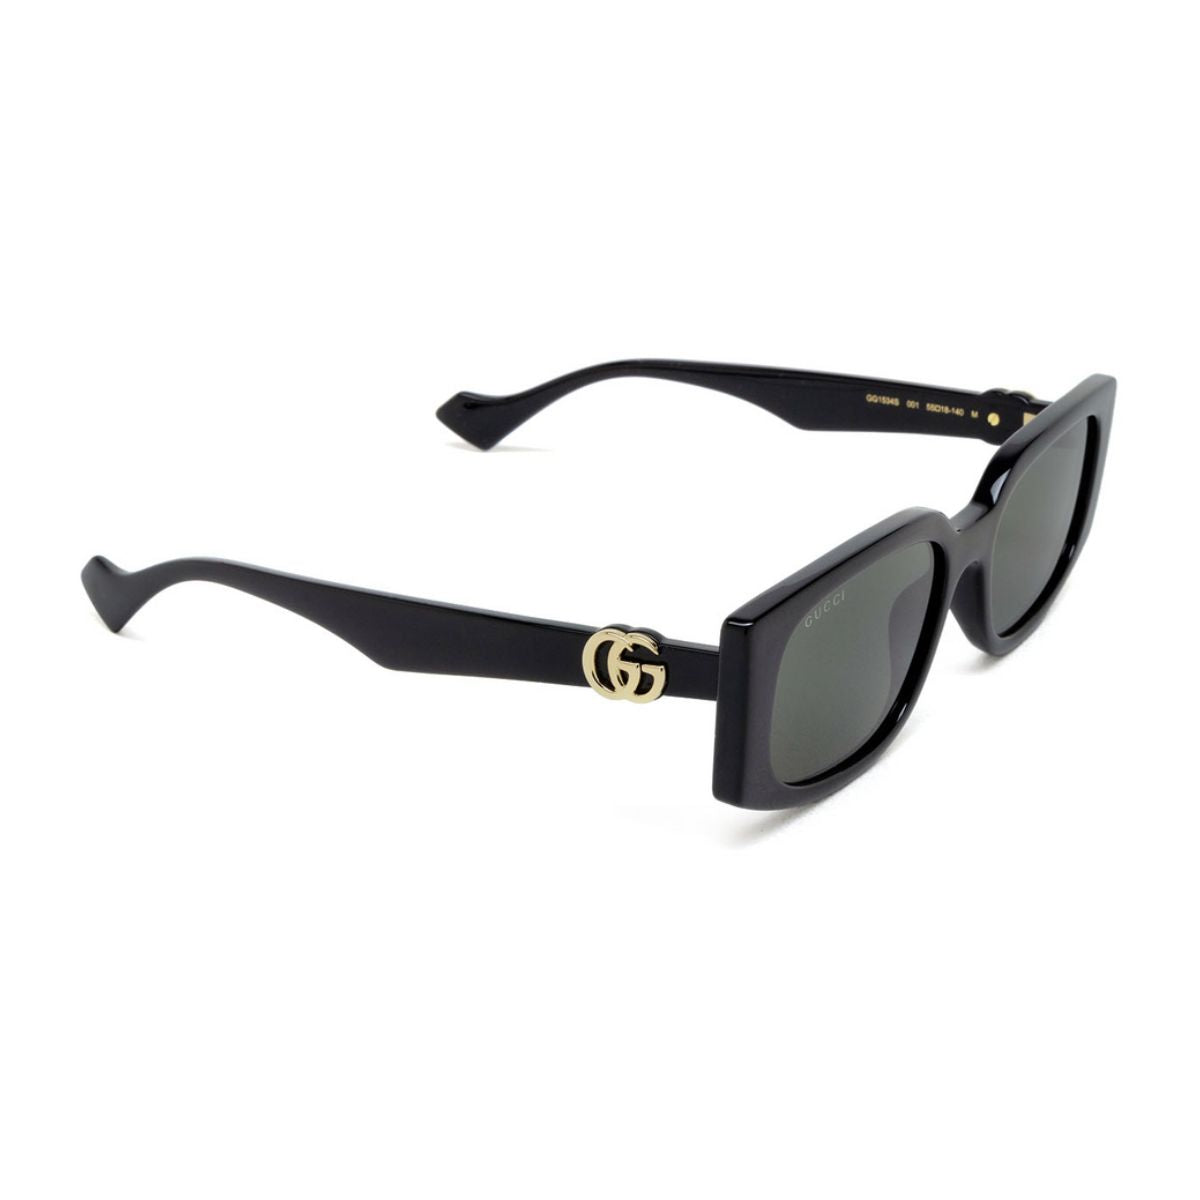 "Gucci 1534S 001 Sunglasses - Elevate Your Style with Optorium's Latest Collection"